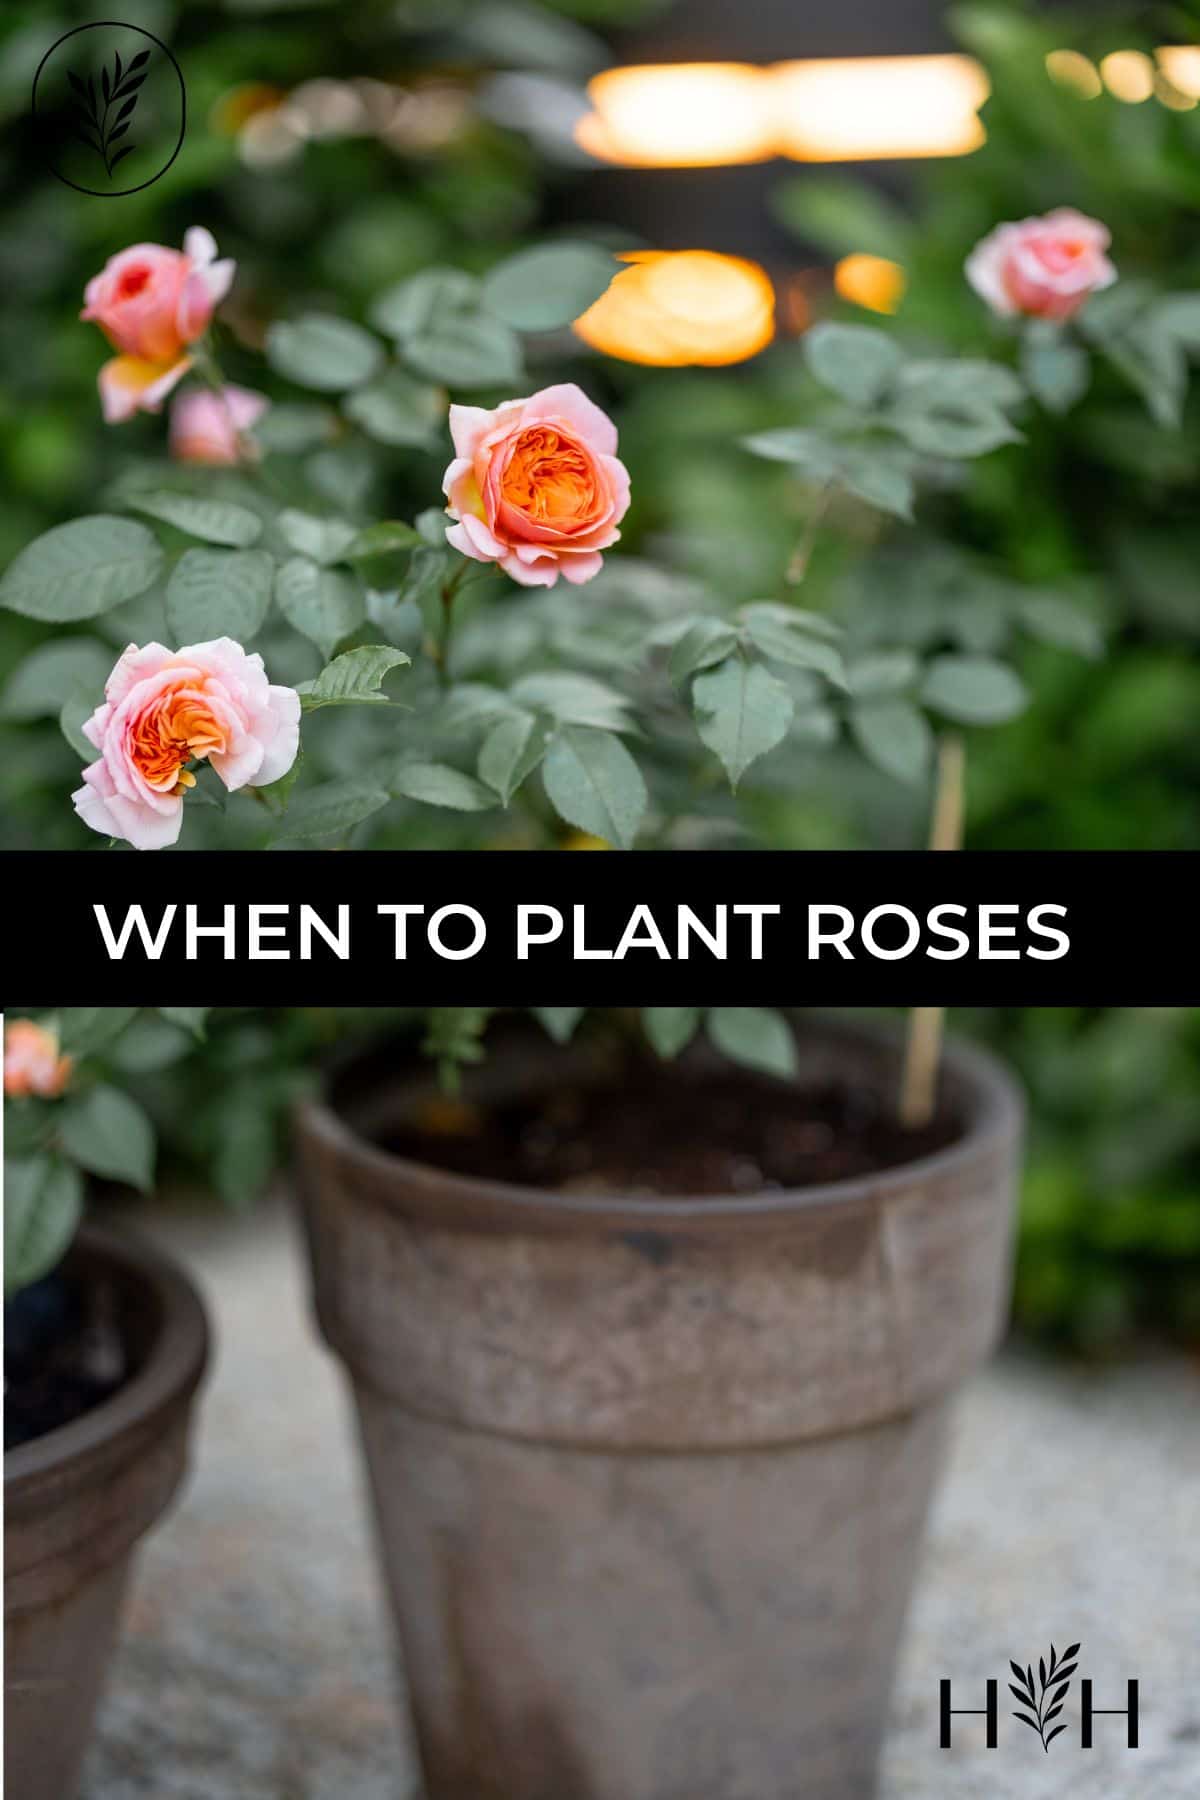 When to plant roses via @home4theharvest